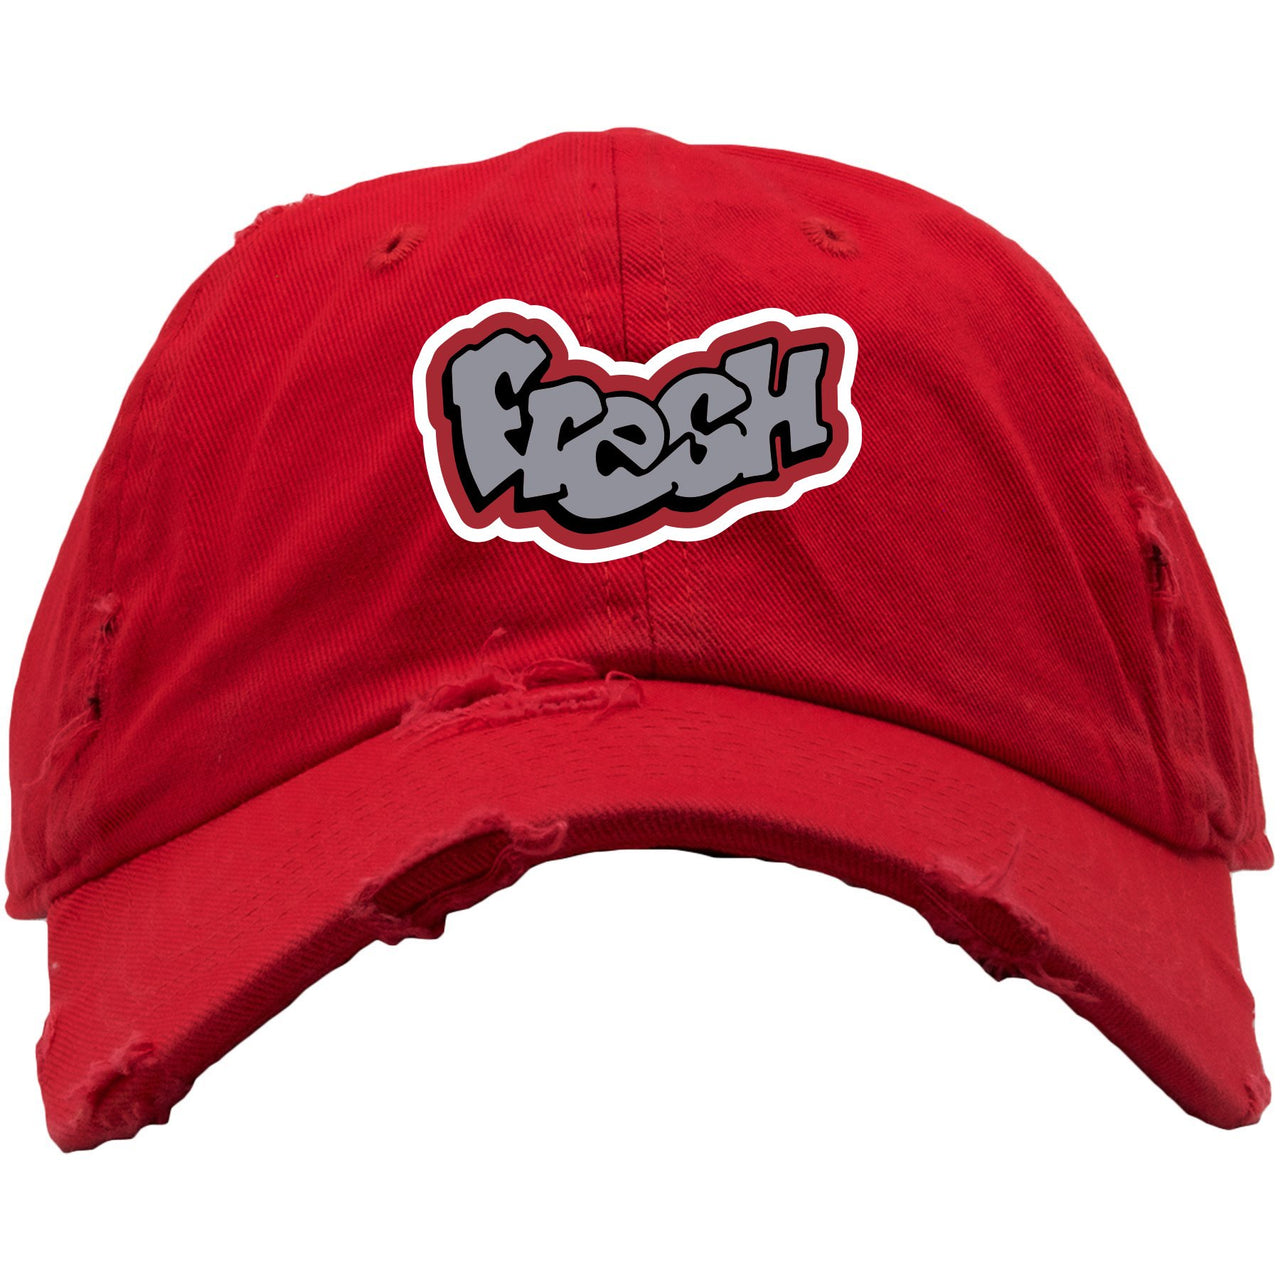 Bred 2019 4s Distressed Dad Hat | Fresh Logo, Red